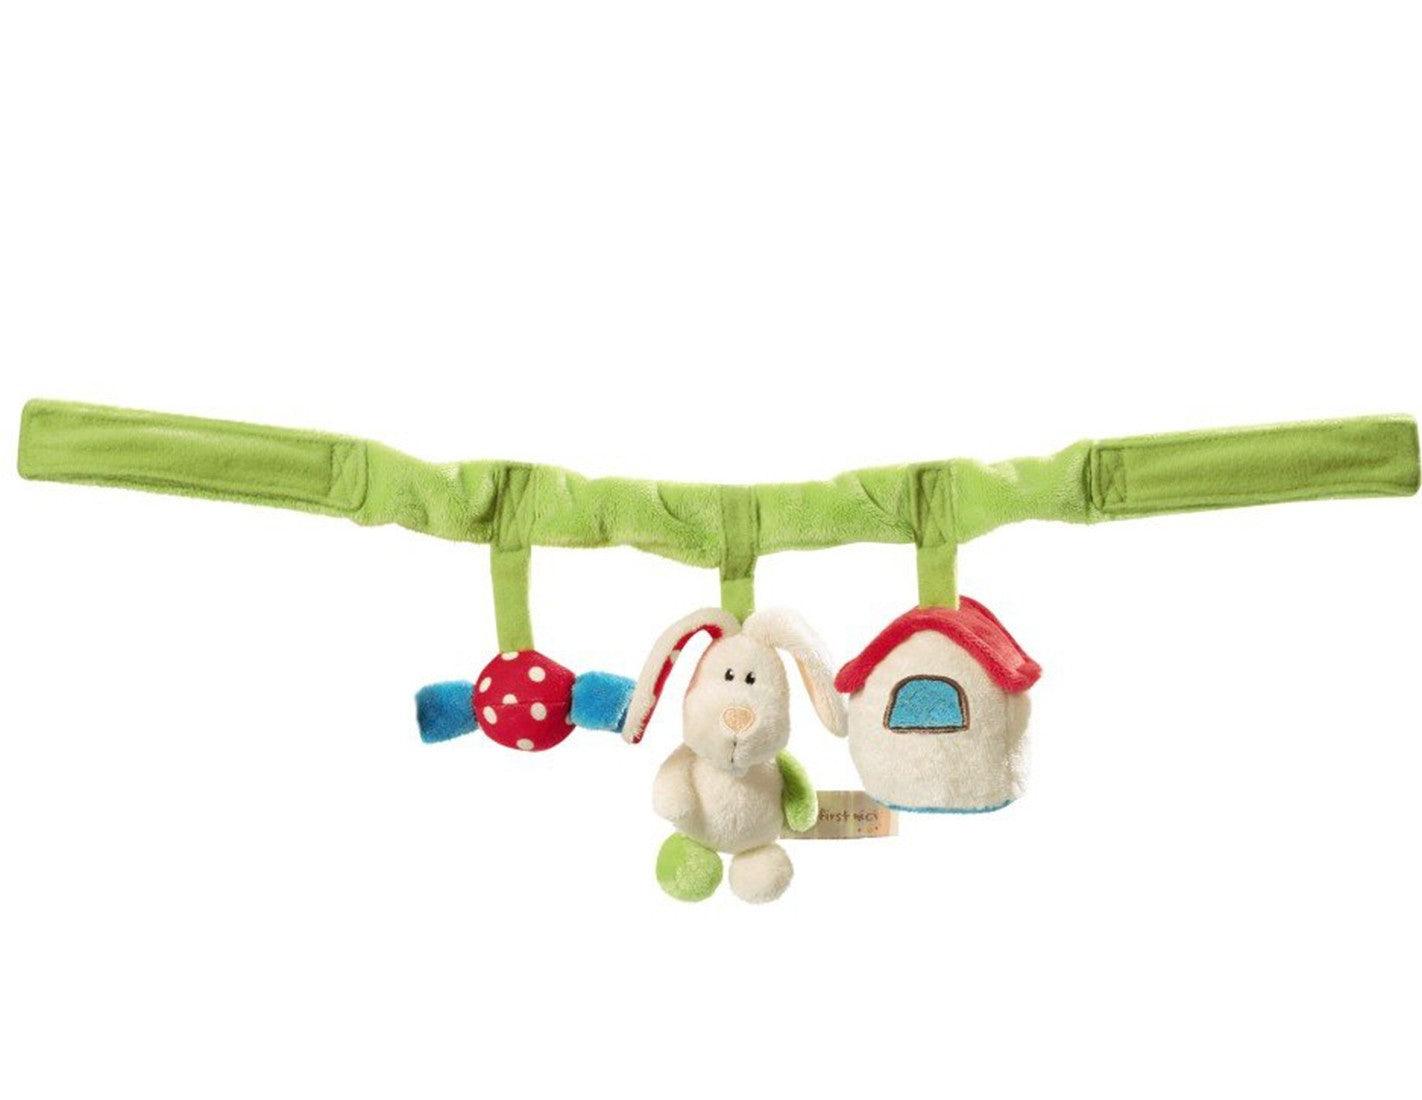 Plush toy for a stroller - a soother - MoonyBoon